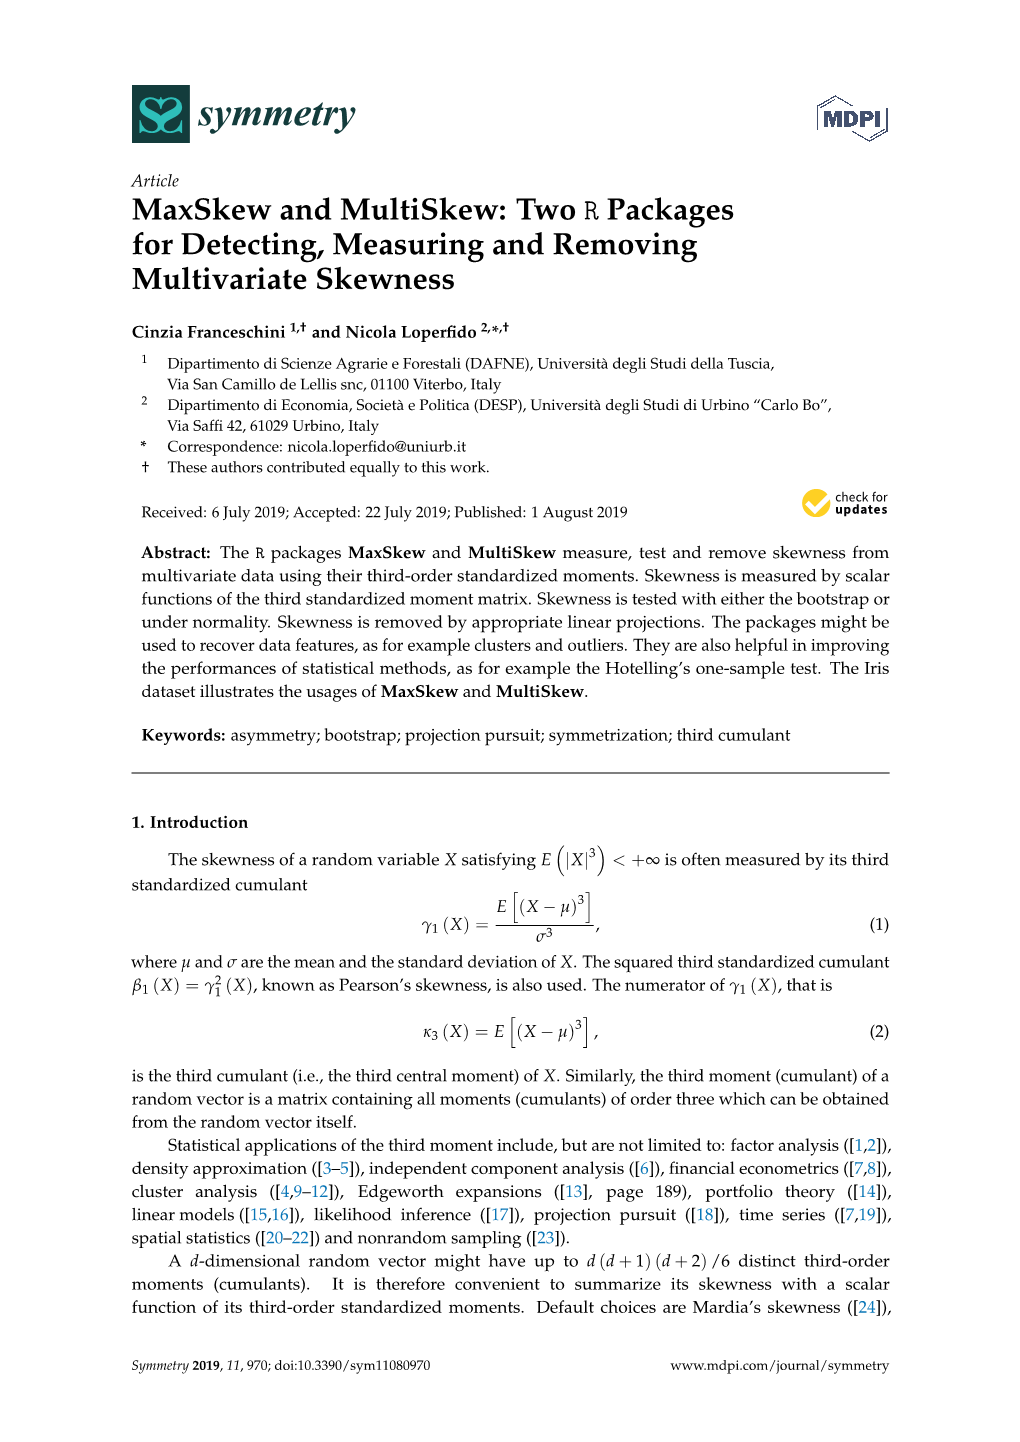 Maxskew and Multiskew: Two R Packages for Detecting, Measuring and Removing Multivariate Skewness